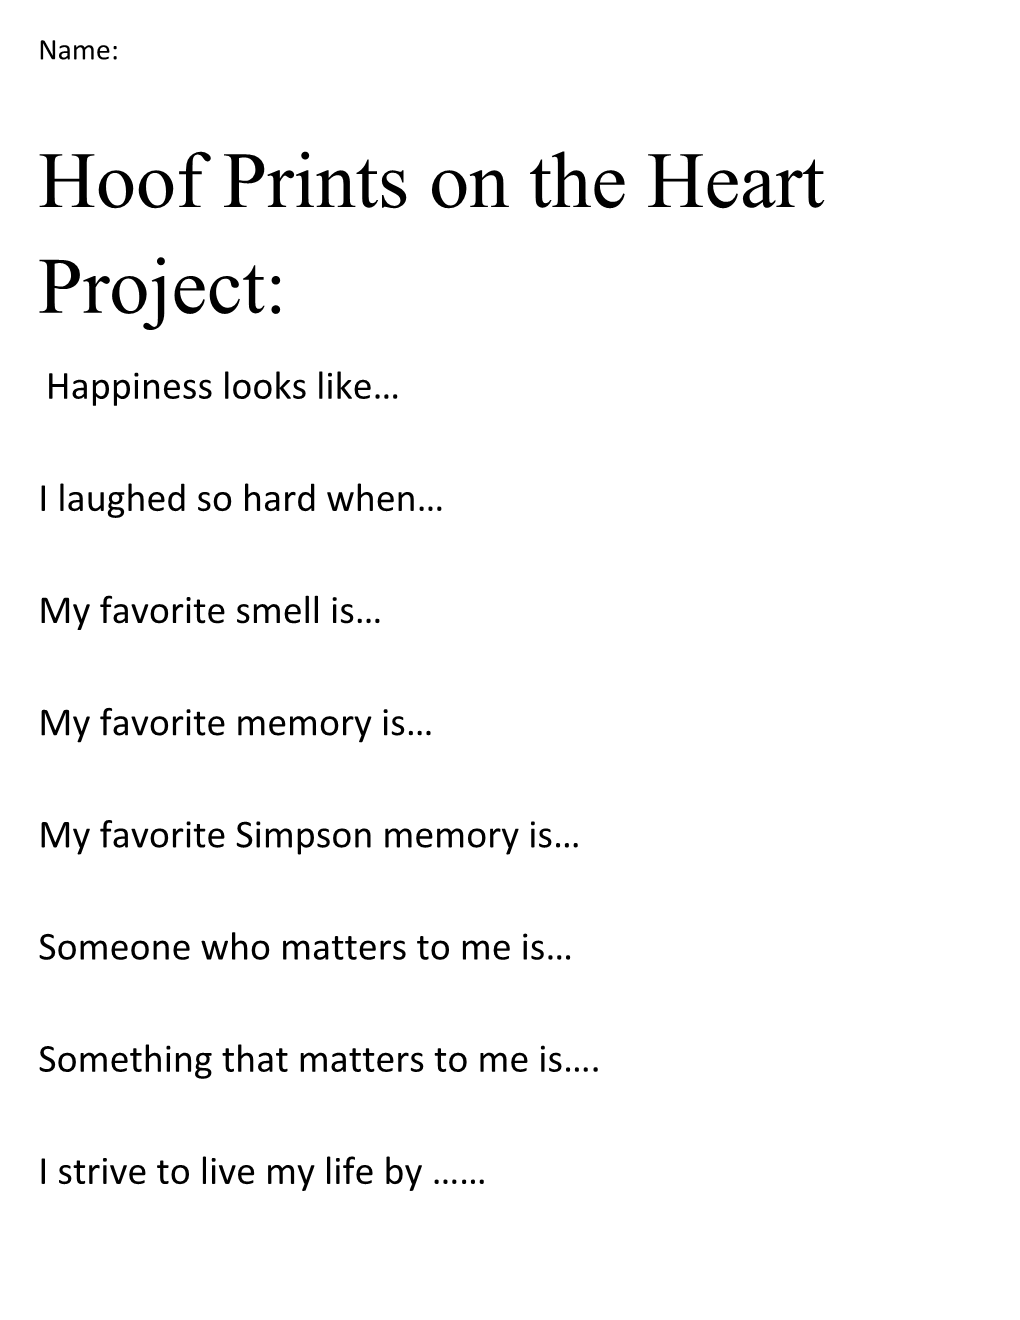 Hoof Prints on the Heart Project